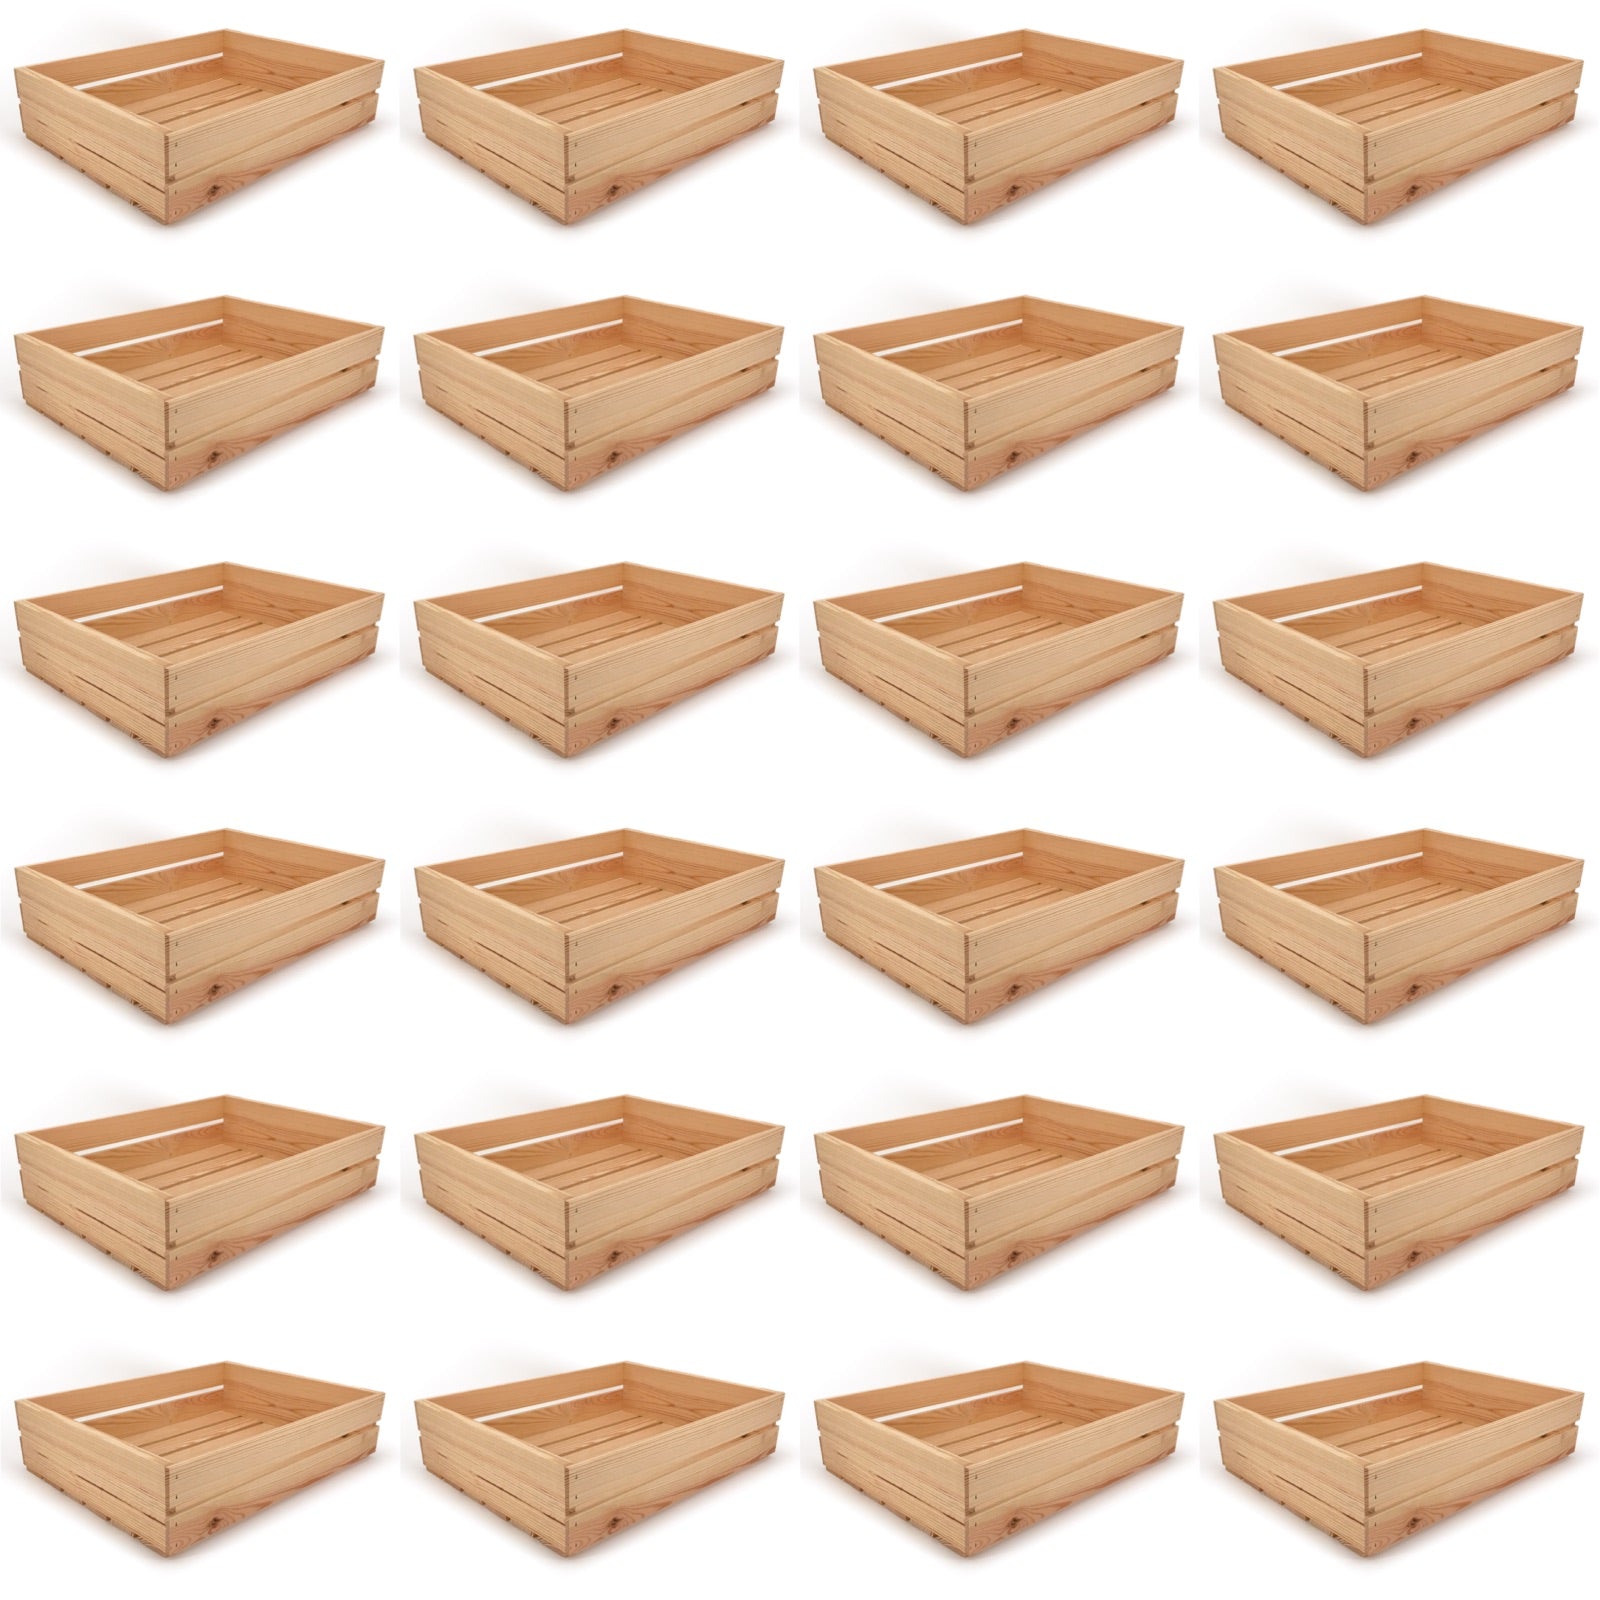 24 Small wooden crates22x17x5.25, 6-WS-22-17-5.25-NX-NW-NL, 12-WS-22-17-5.25-NX-NW-NL, 24-WS-22-17-5.25-NX-NW-NL, 48-WS-22-17-5.25-NX-NW-NL, 96-WS-22-17-5.25-NX-NW-NL